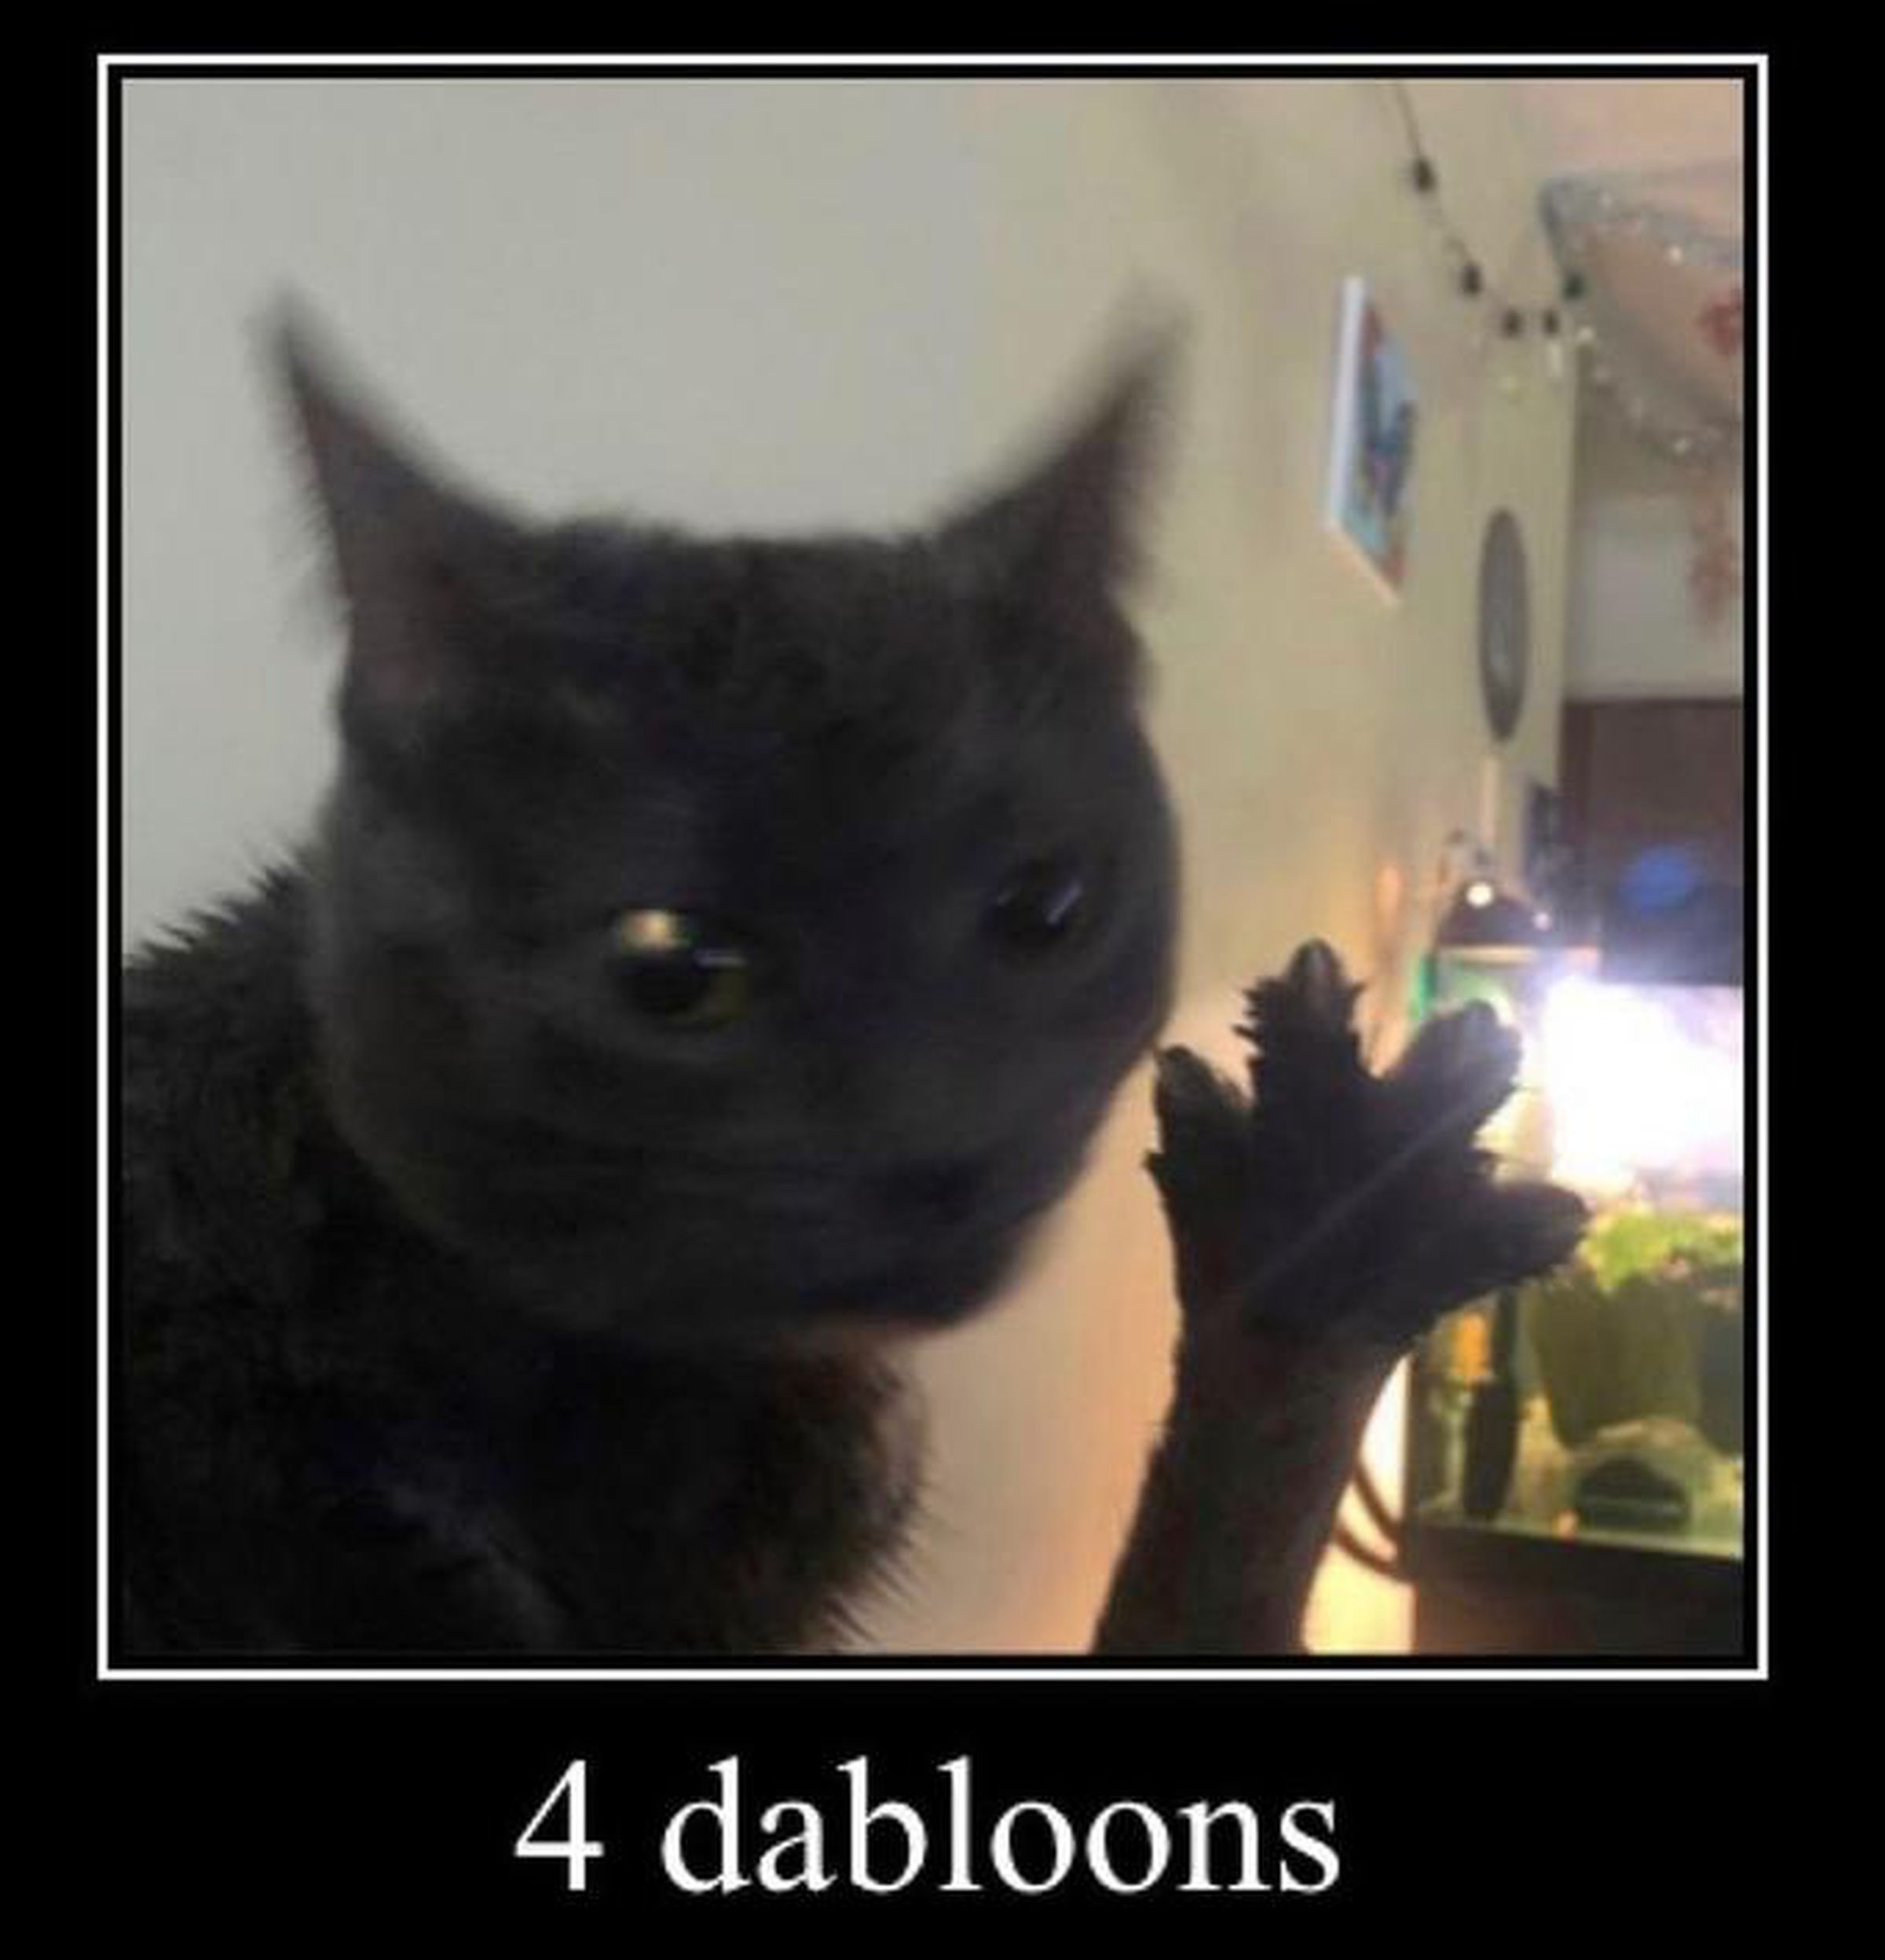 A cat holding up an outstretched paw. Text below the image says “4 dabloons”.